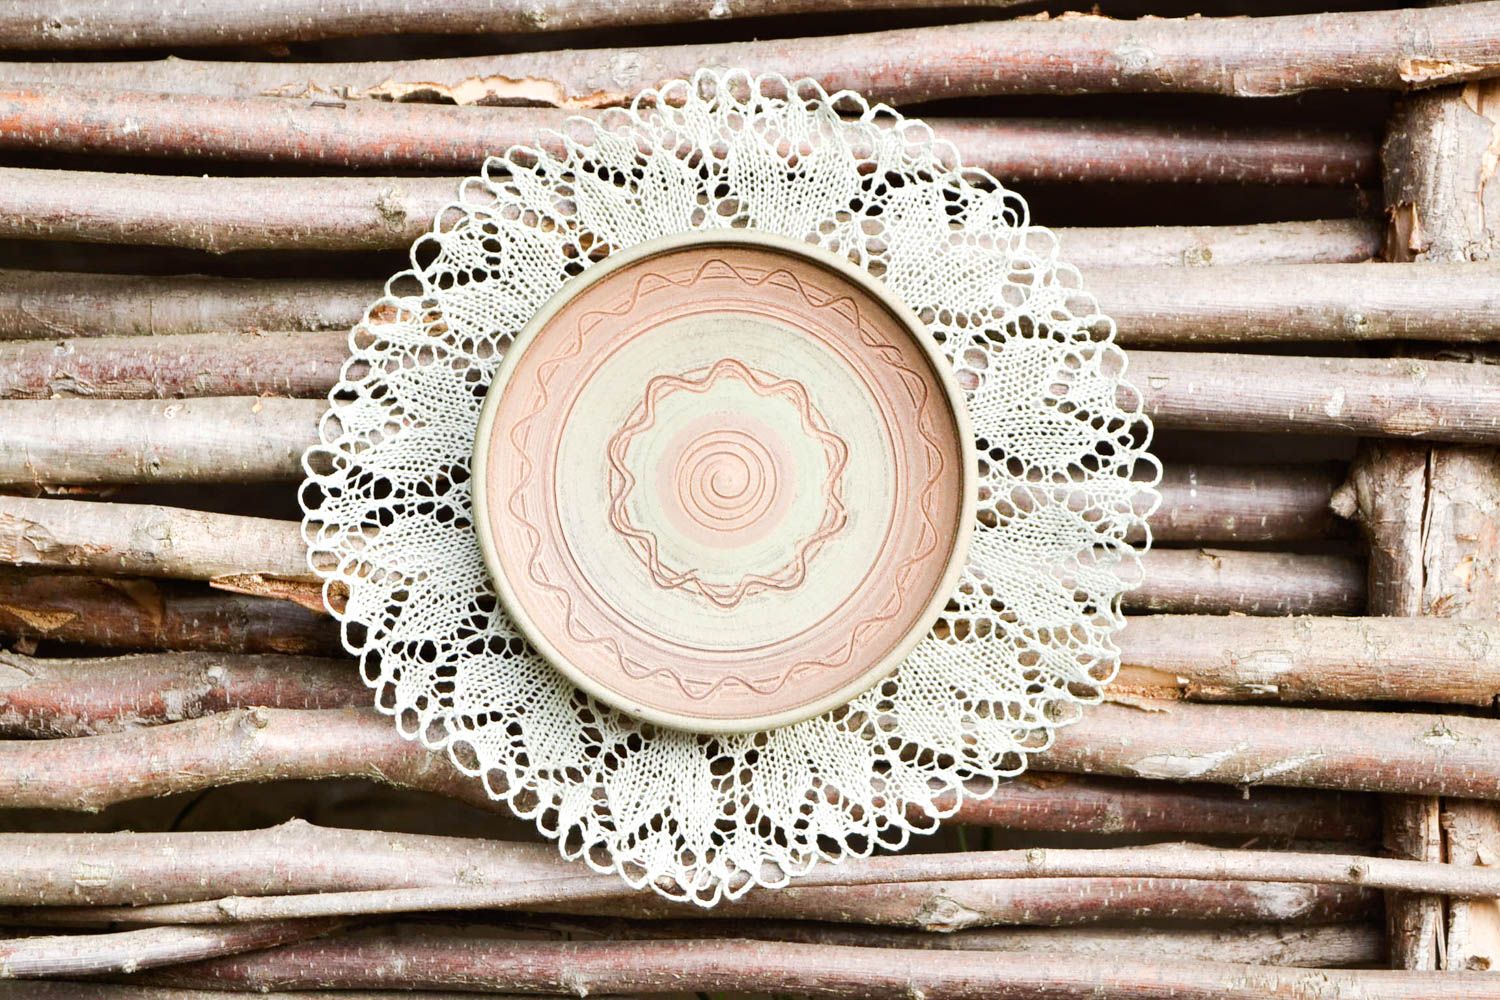 Handmade decorative plate wall hanging ceramic plate for decorative use only photo 1